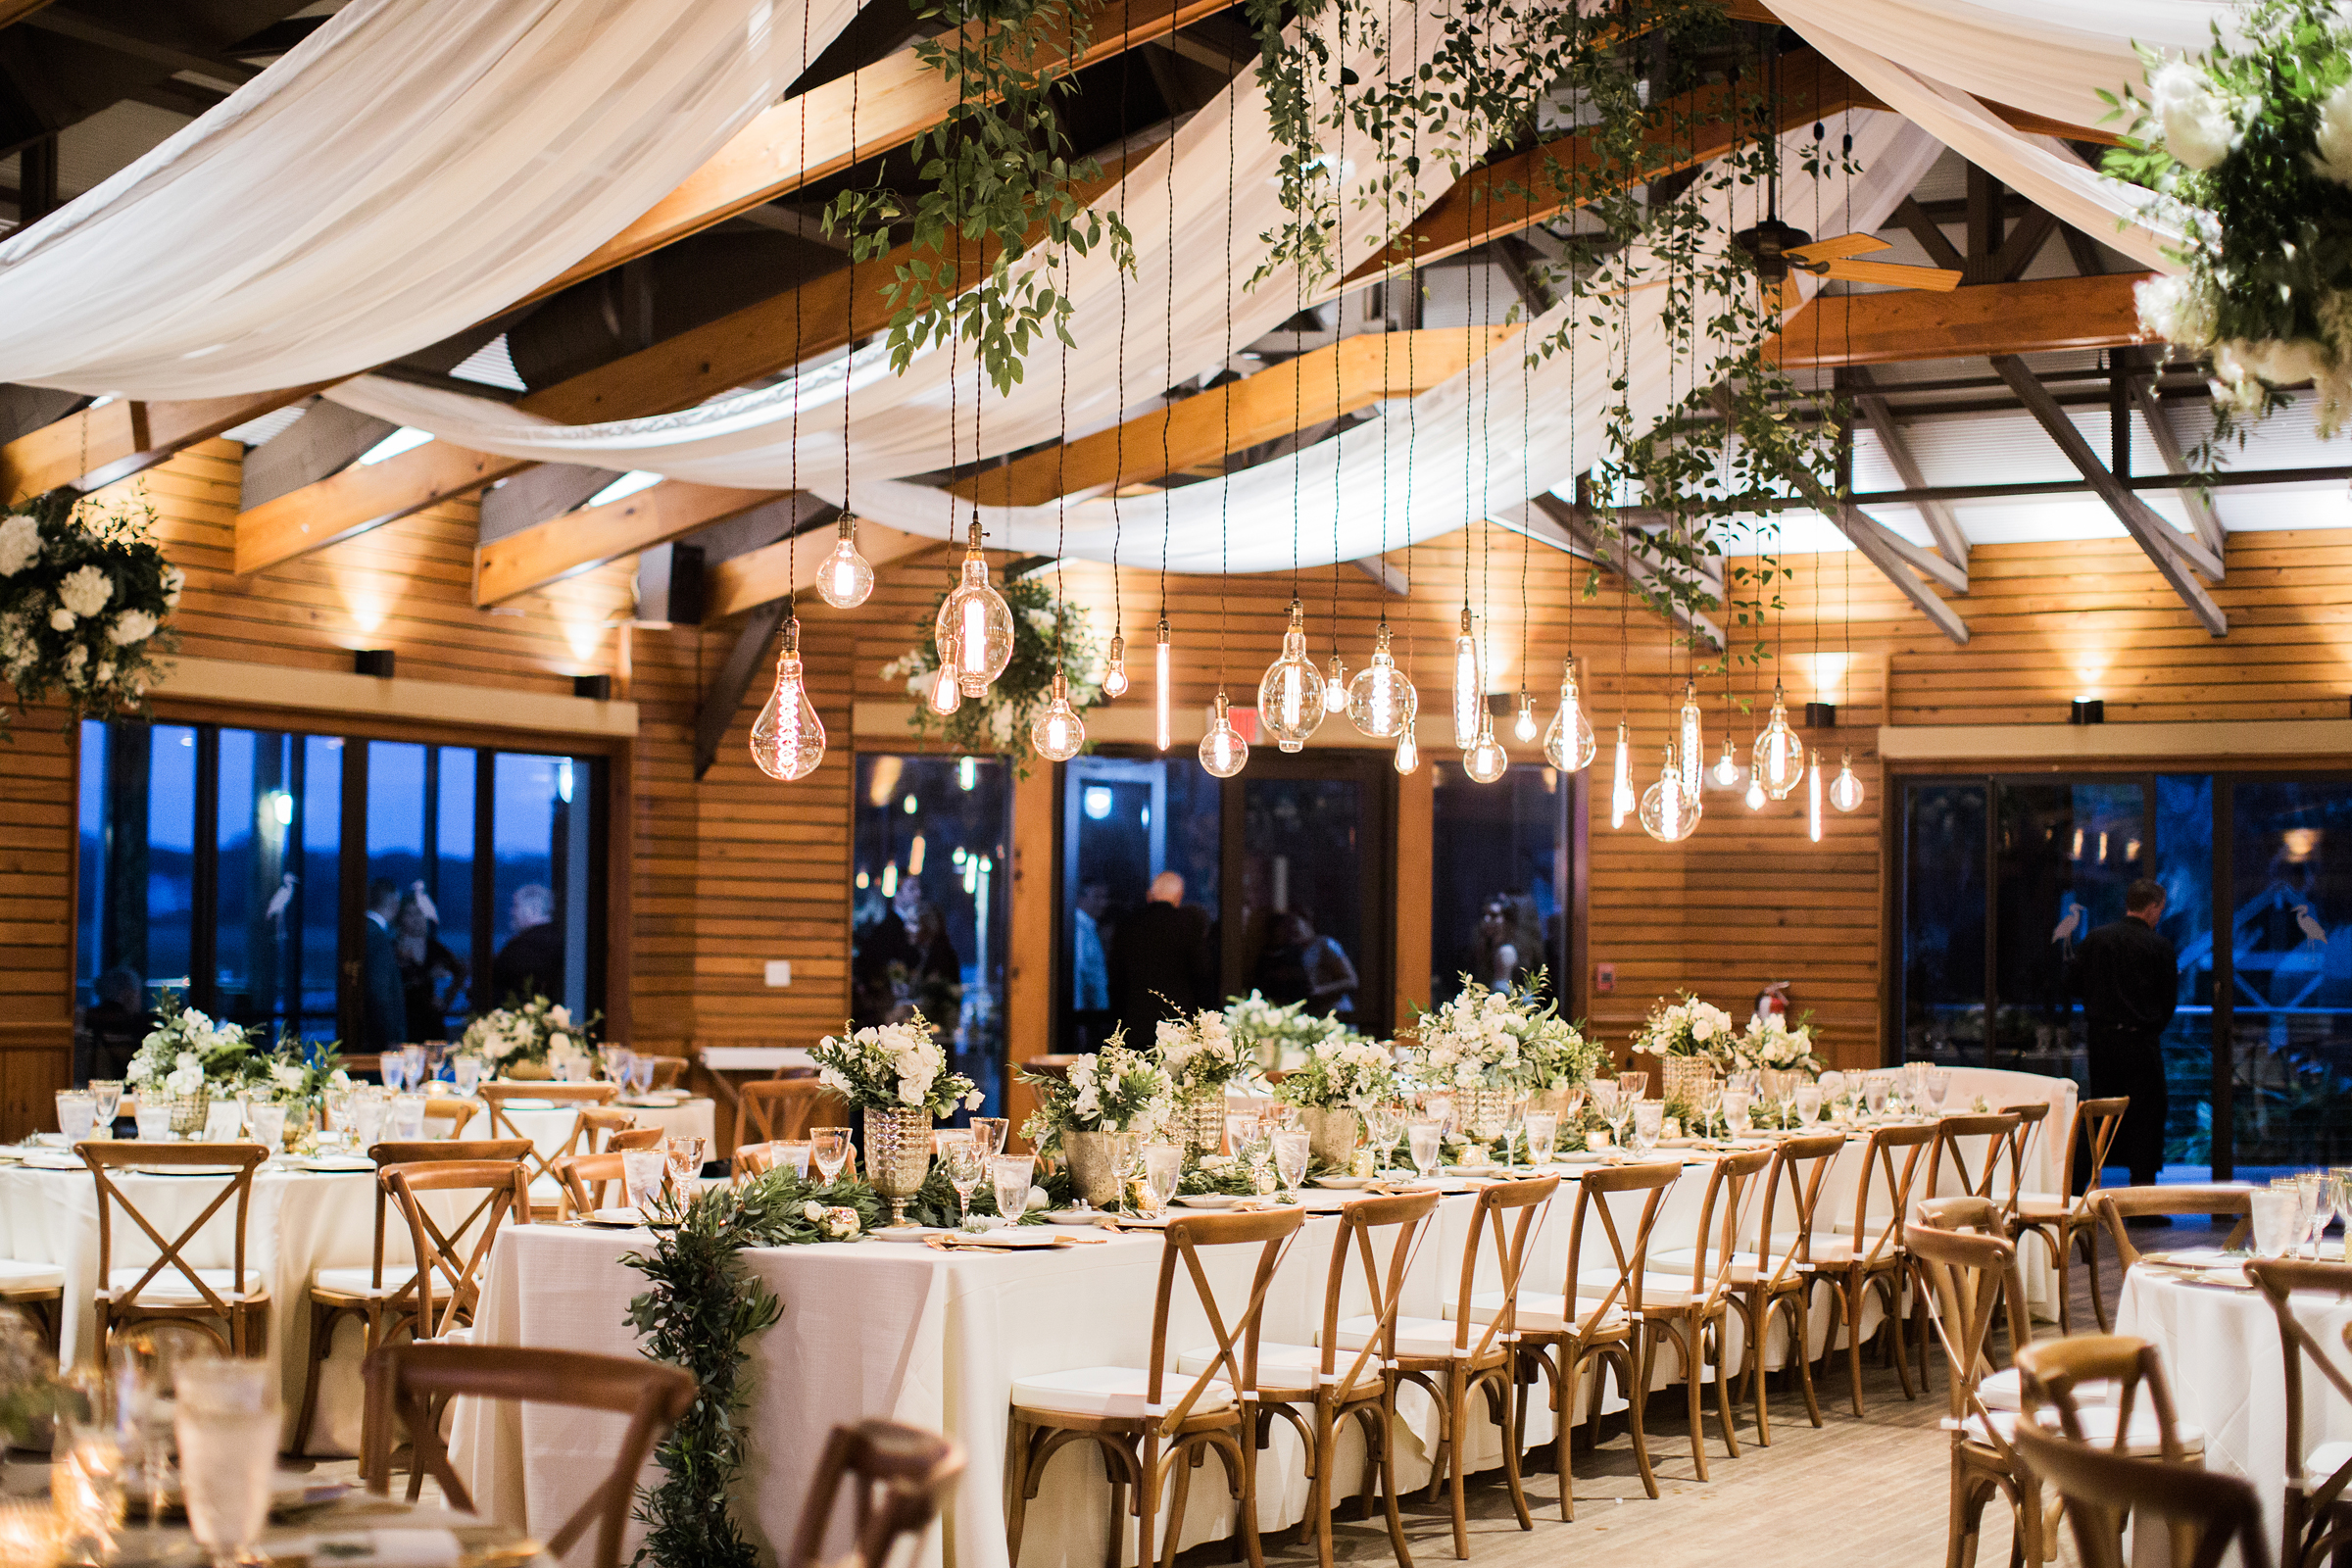 Reception Room with Draping and Greenery